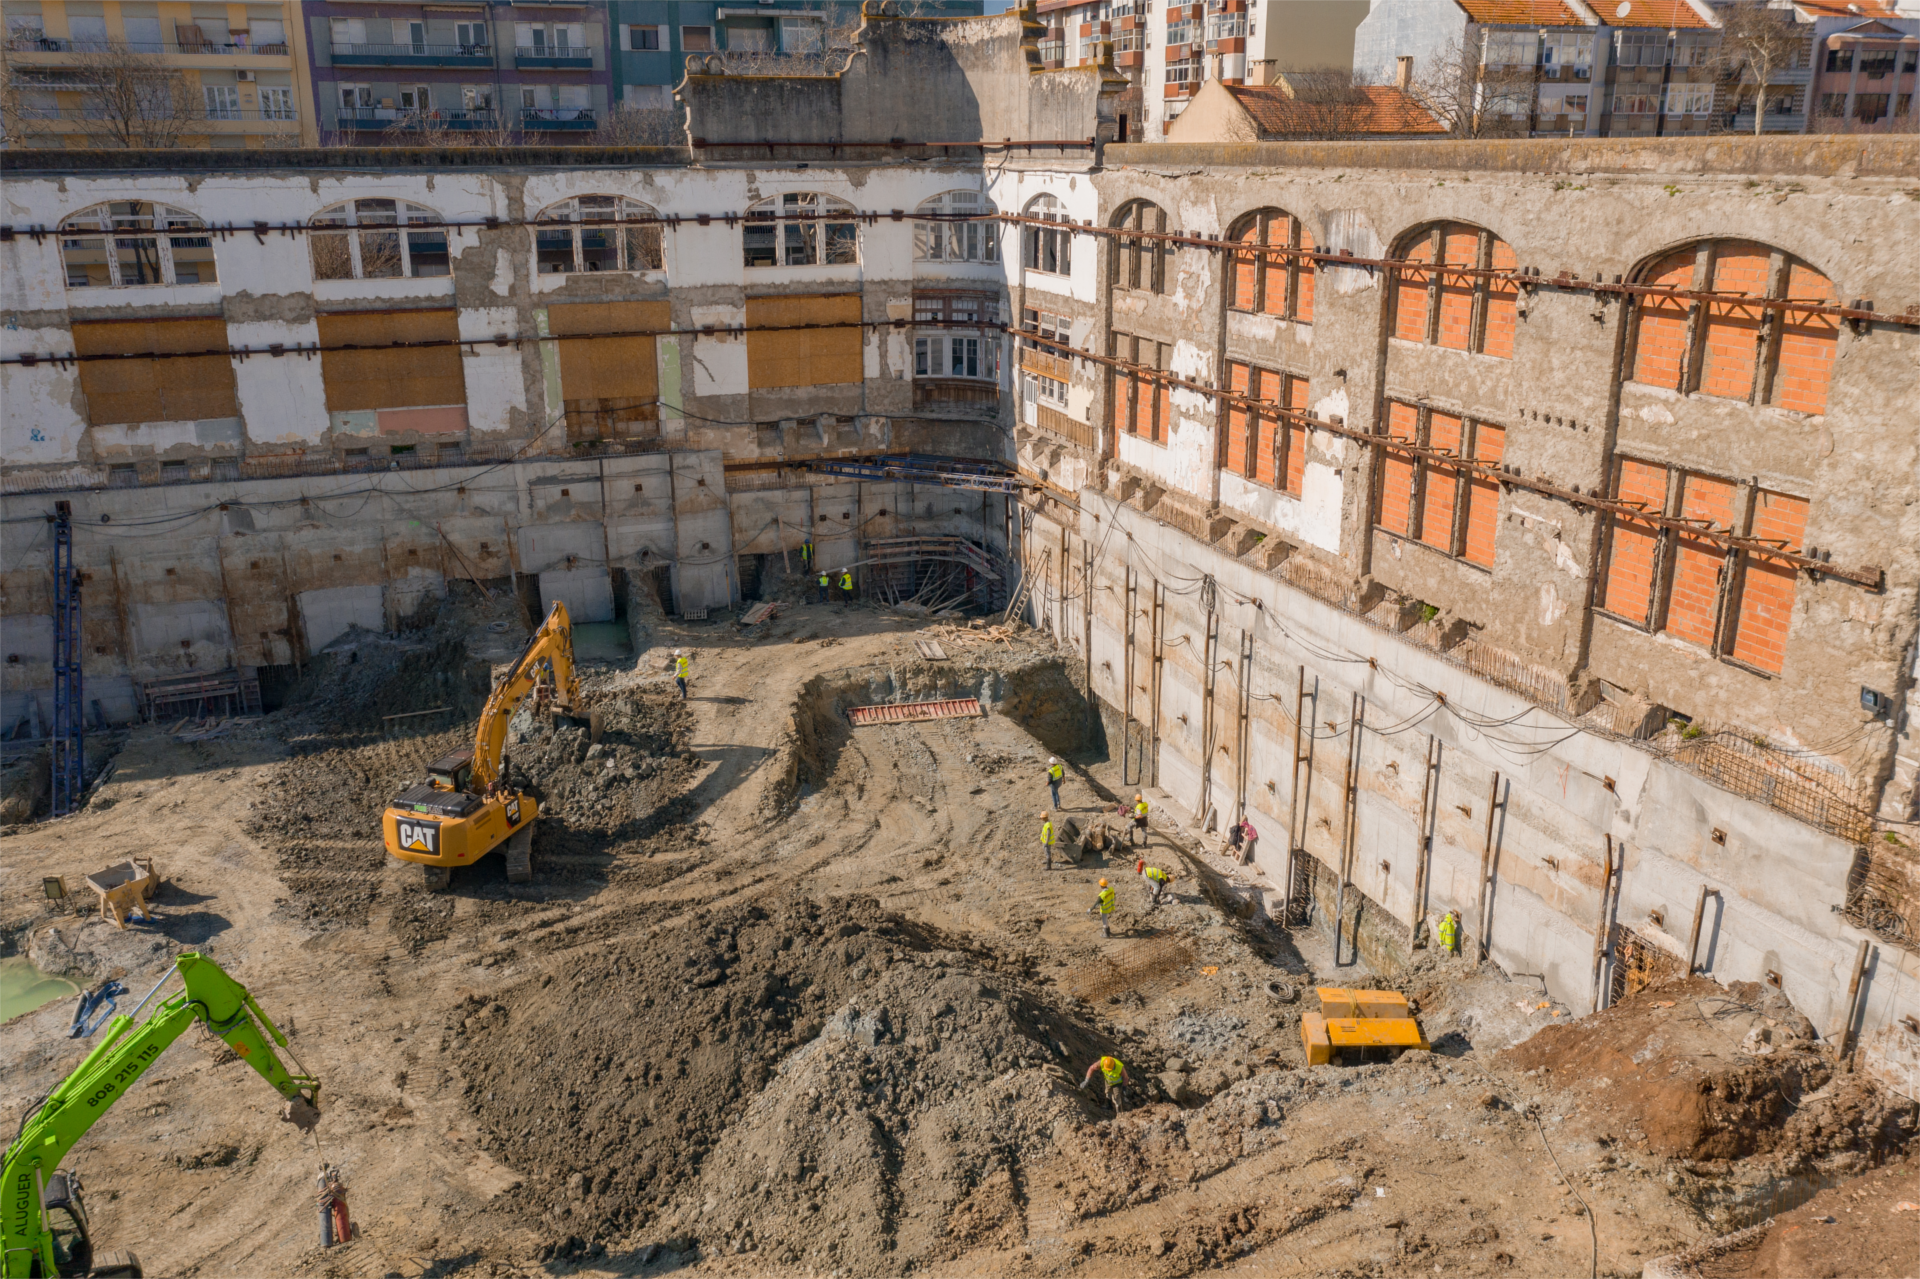 February 2020: Continuation of excavation and containment work